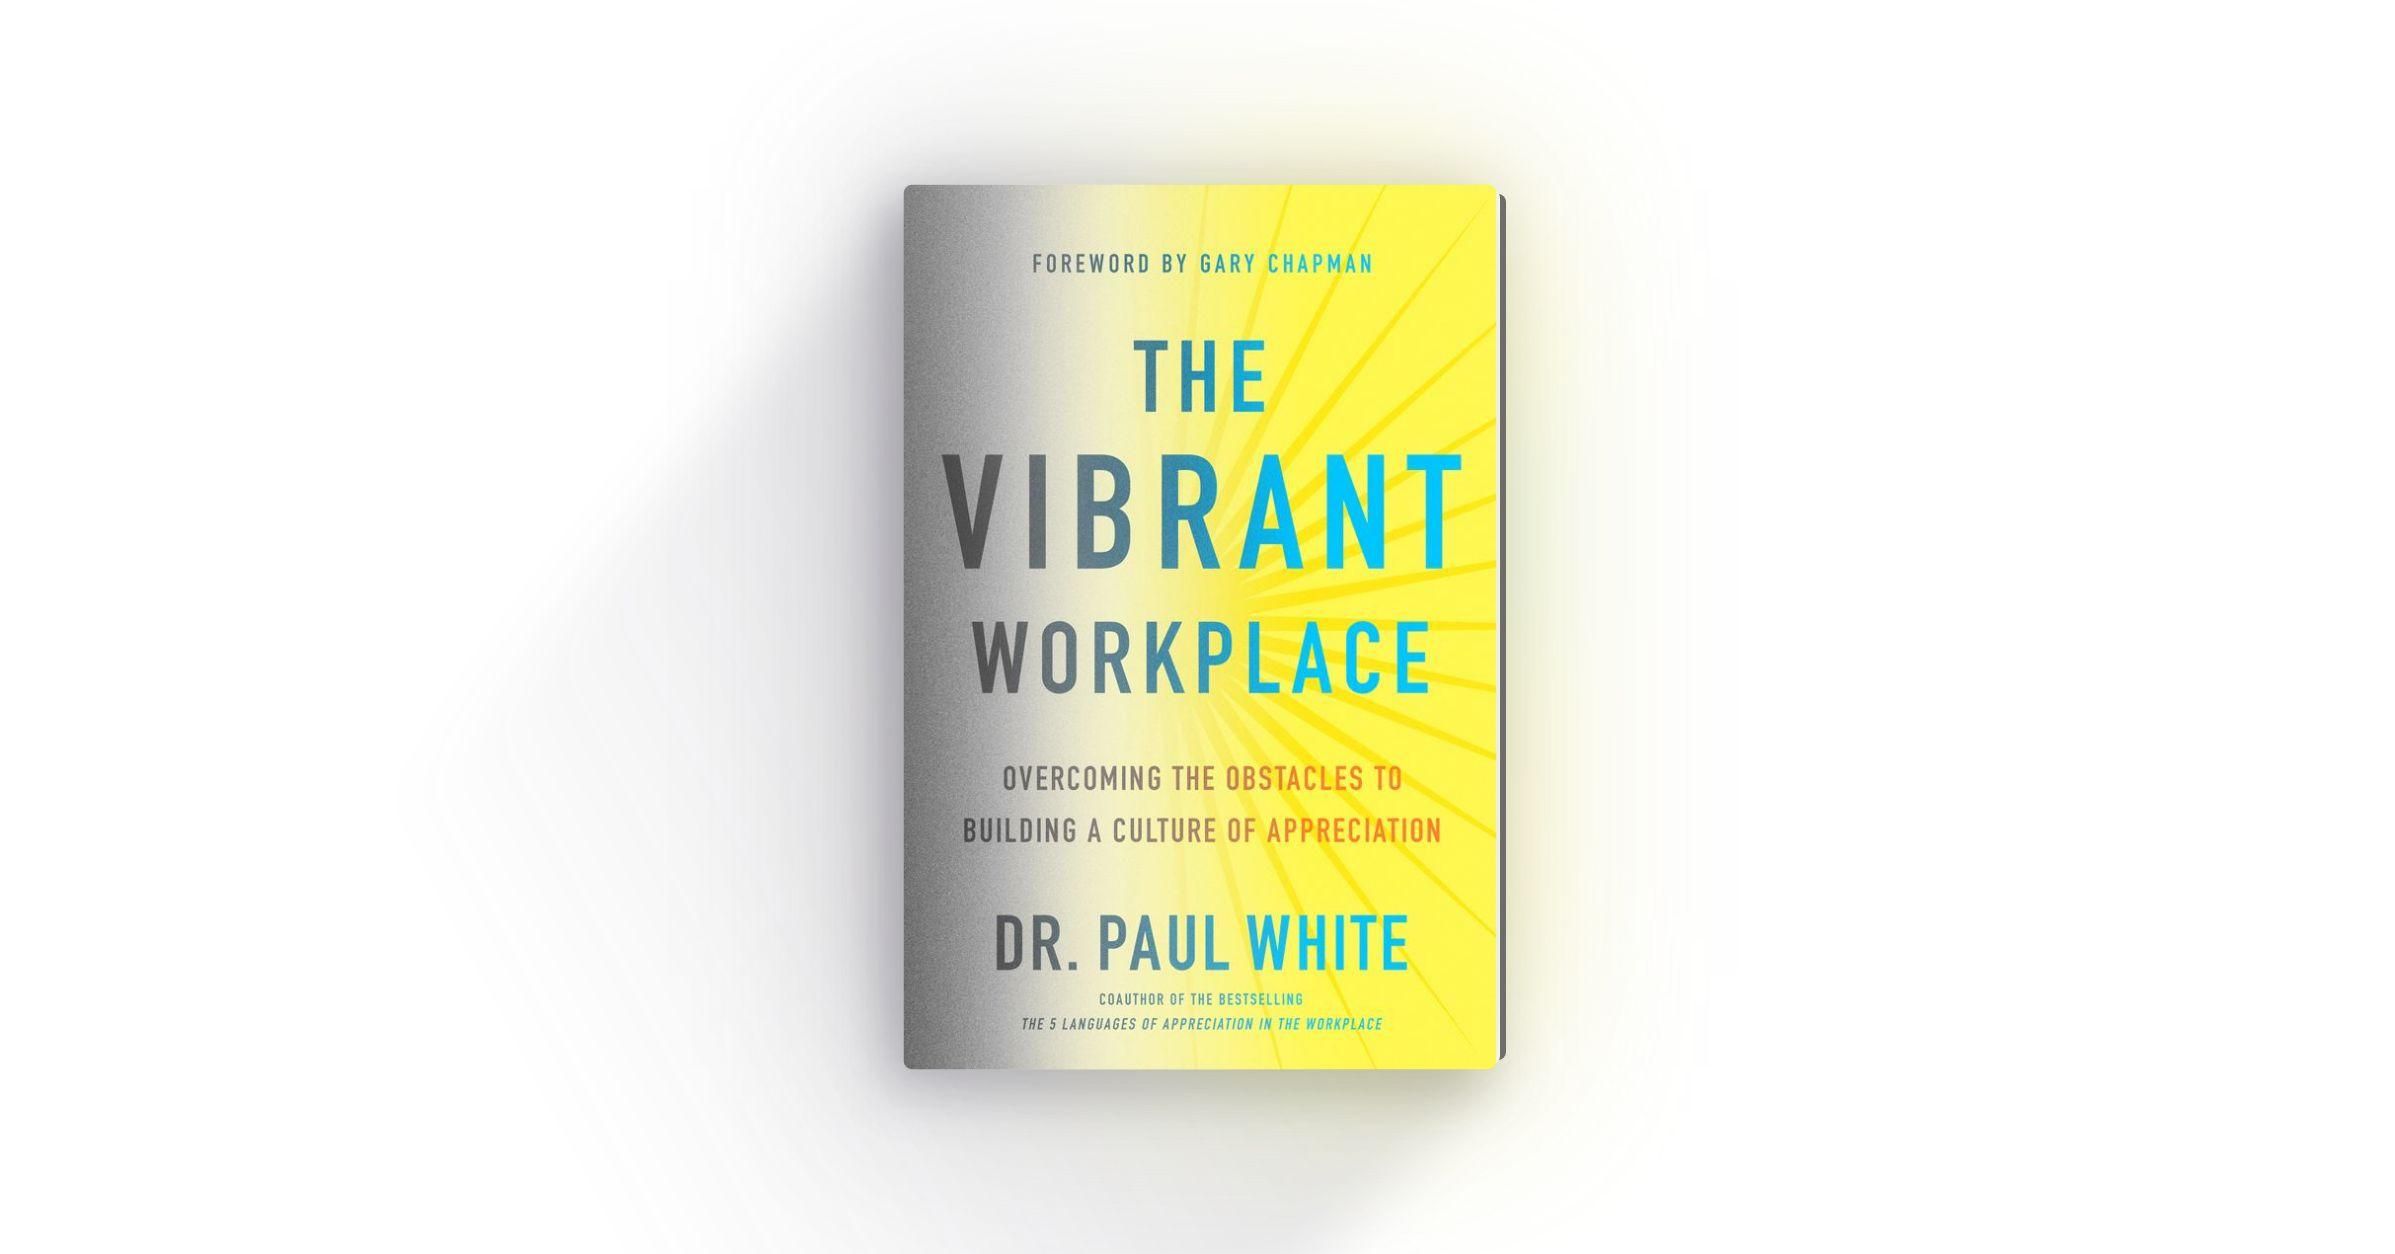 The Vibrant Workplace